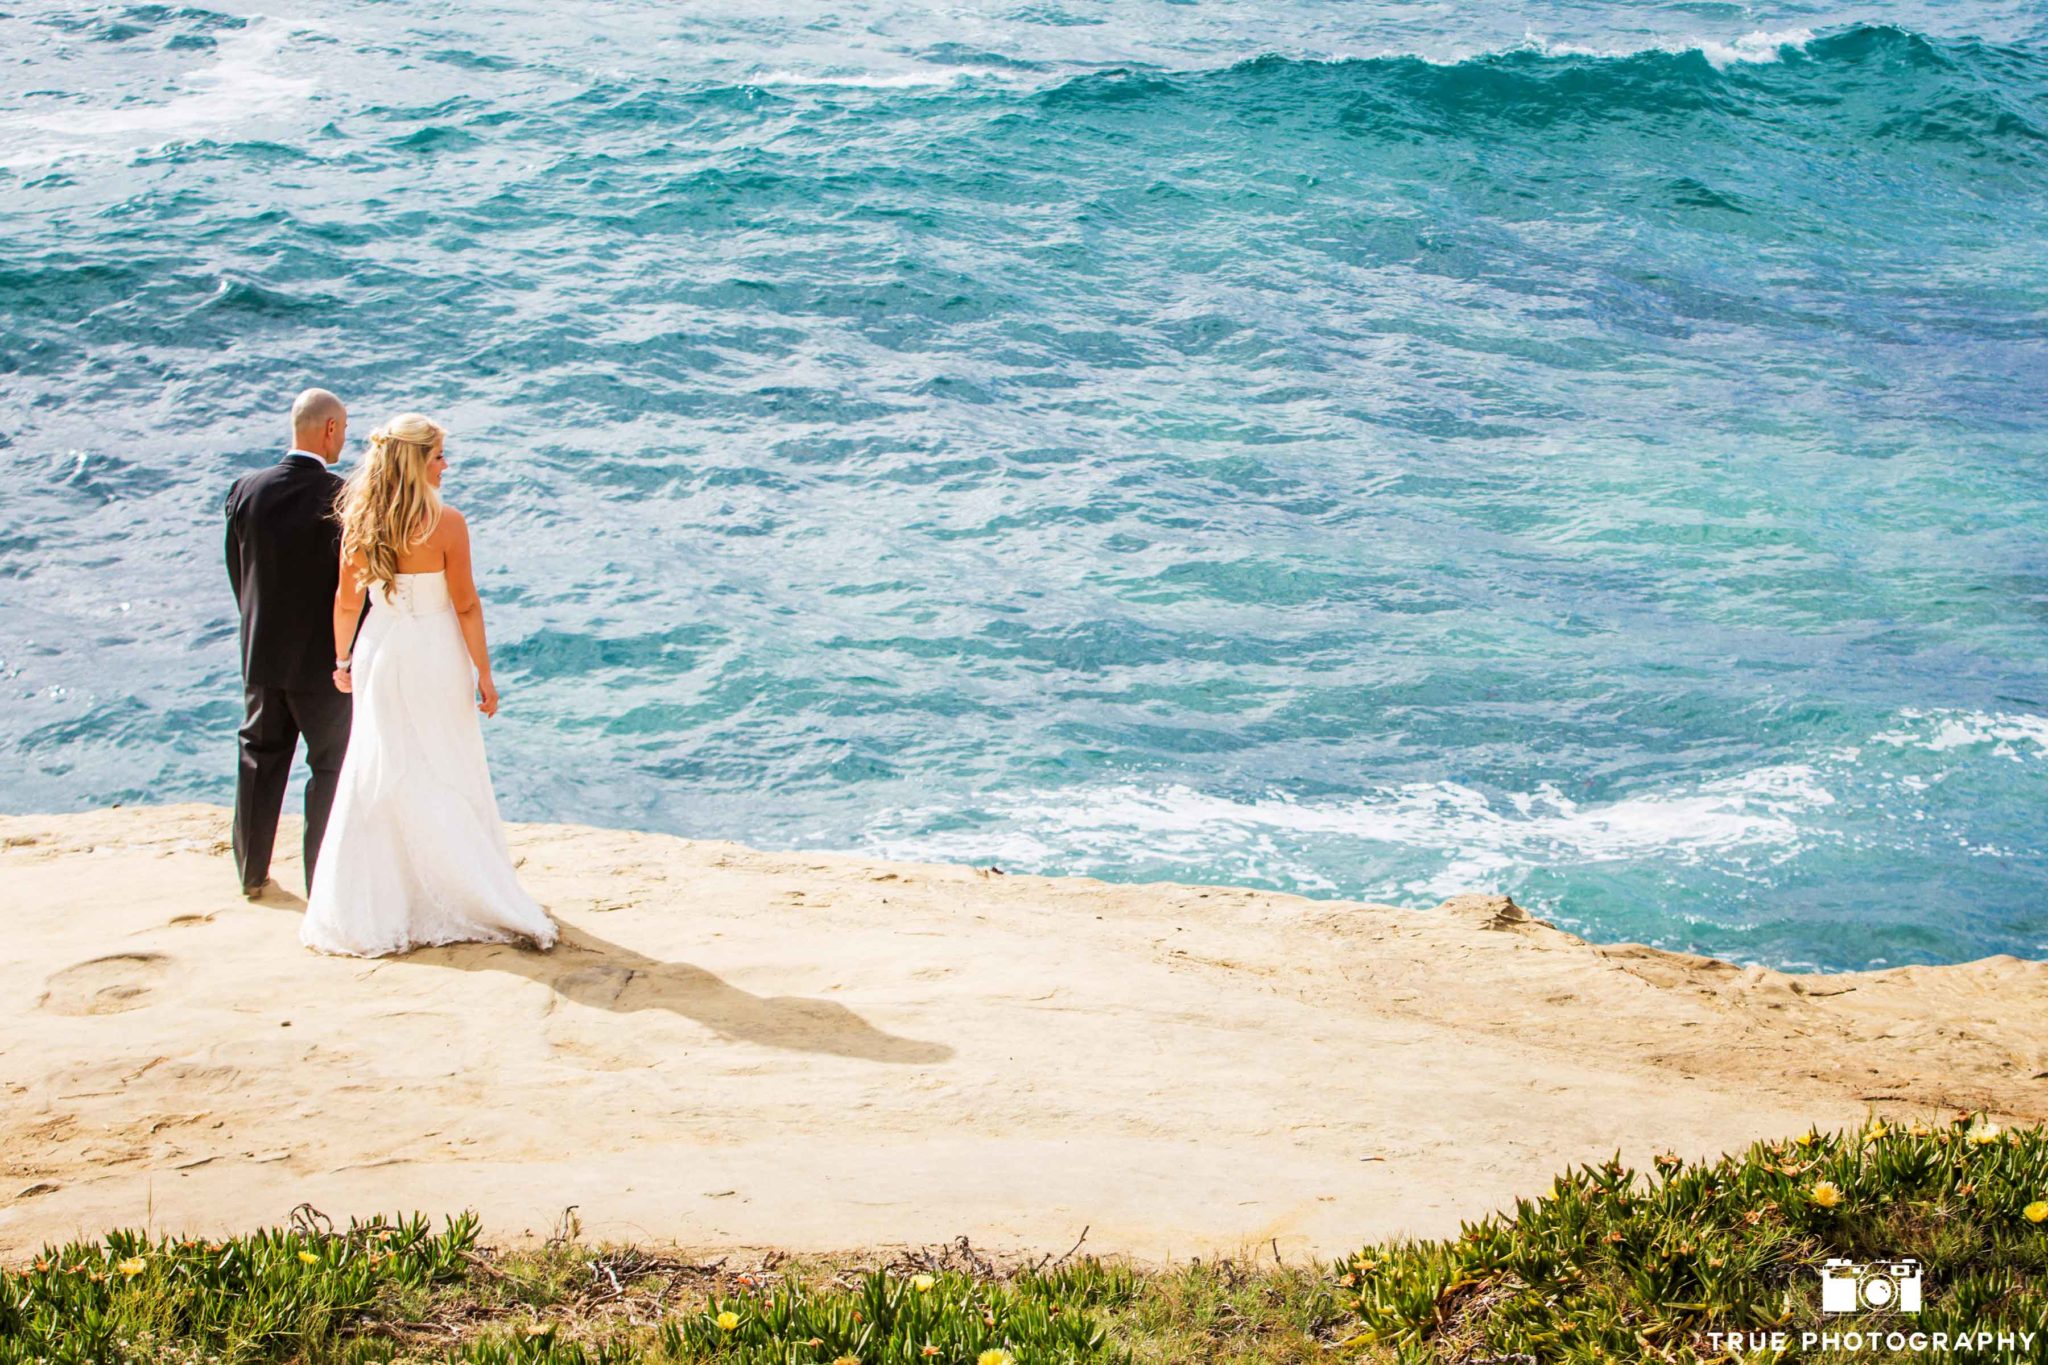 All Inclusive Wedding Packages San Diego: Best Wedding Packages